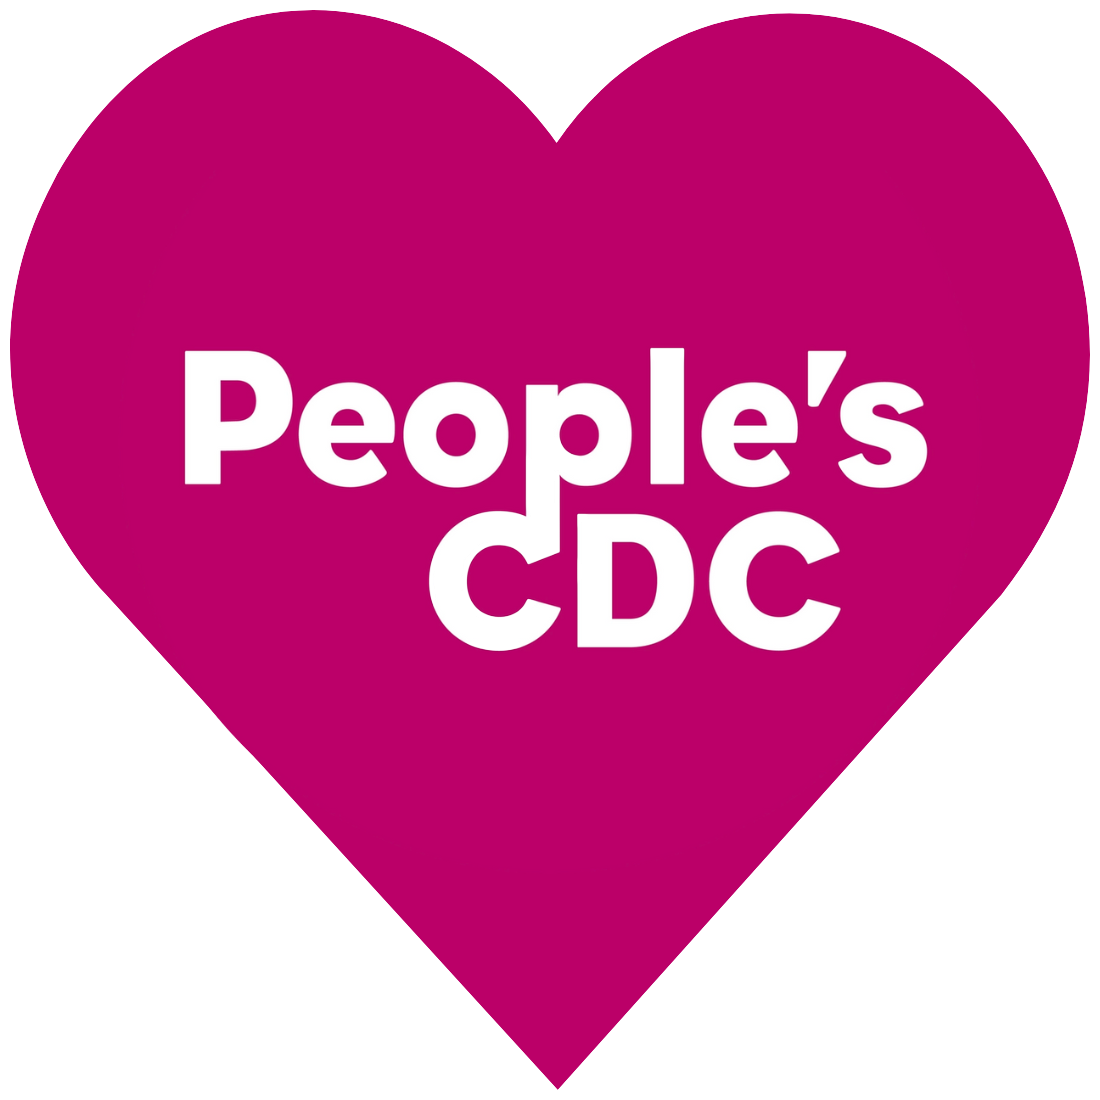 People's CDC logo in the shape of a heart.